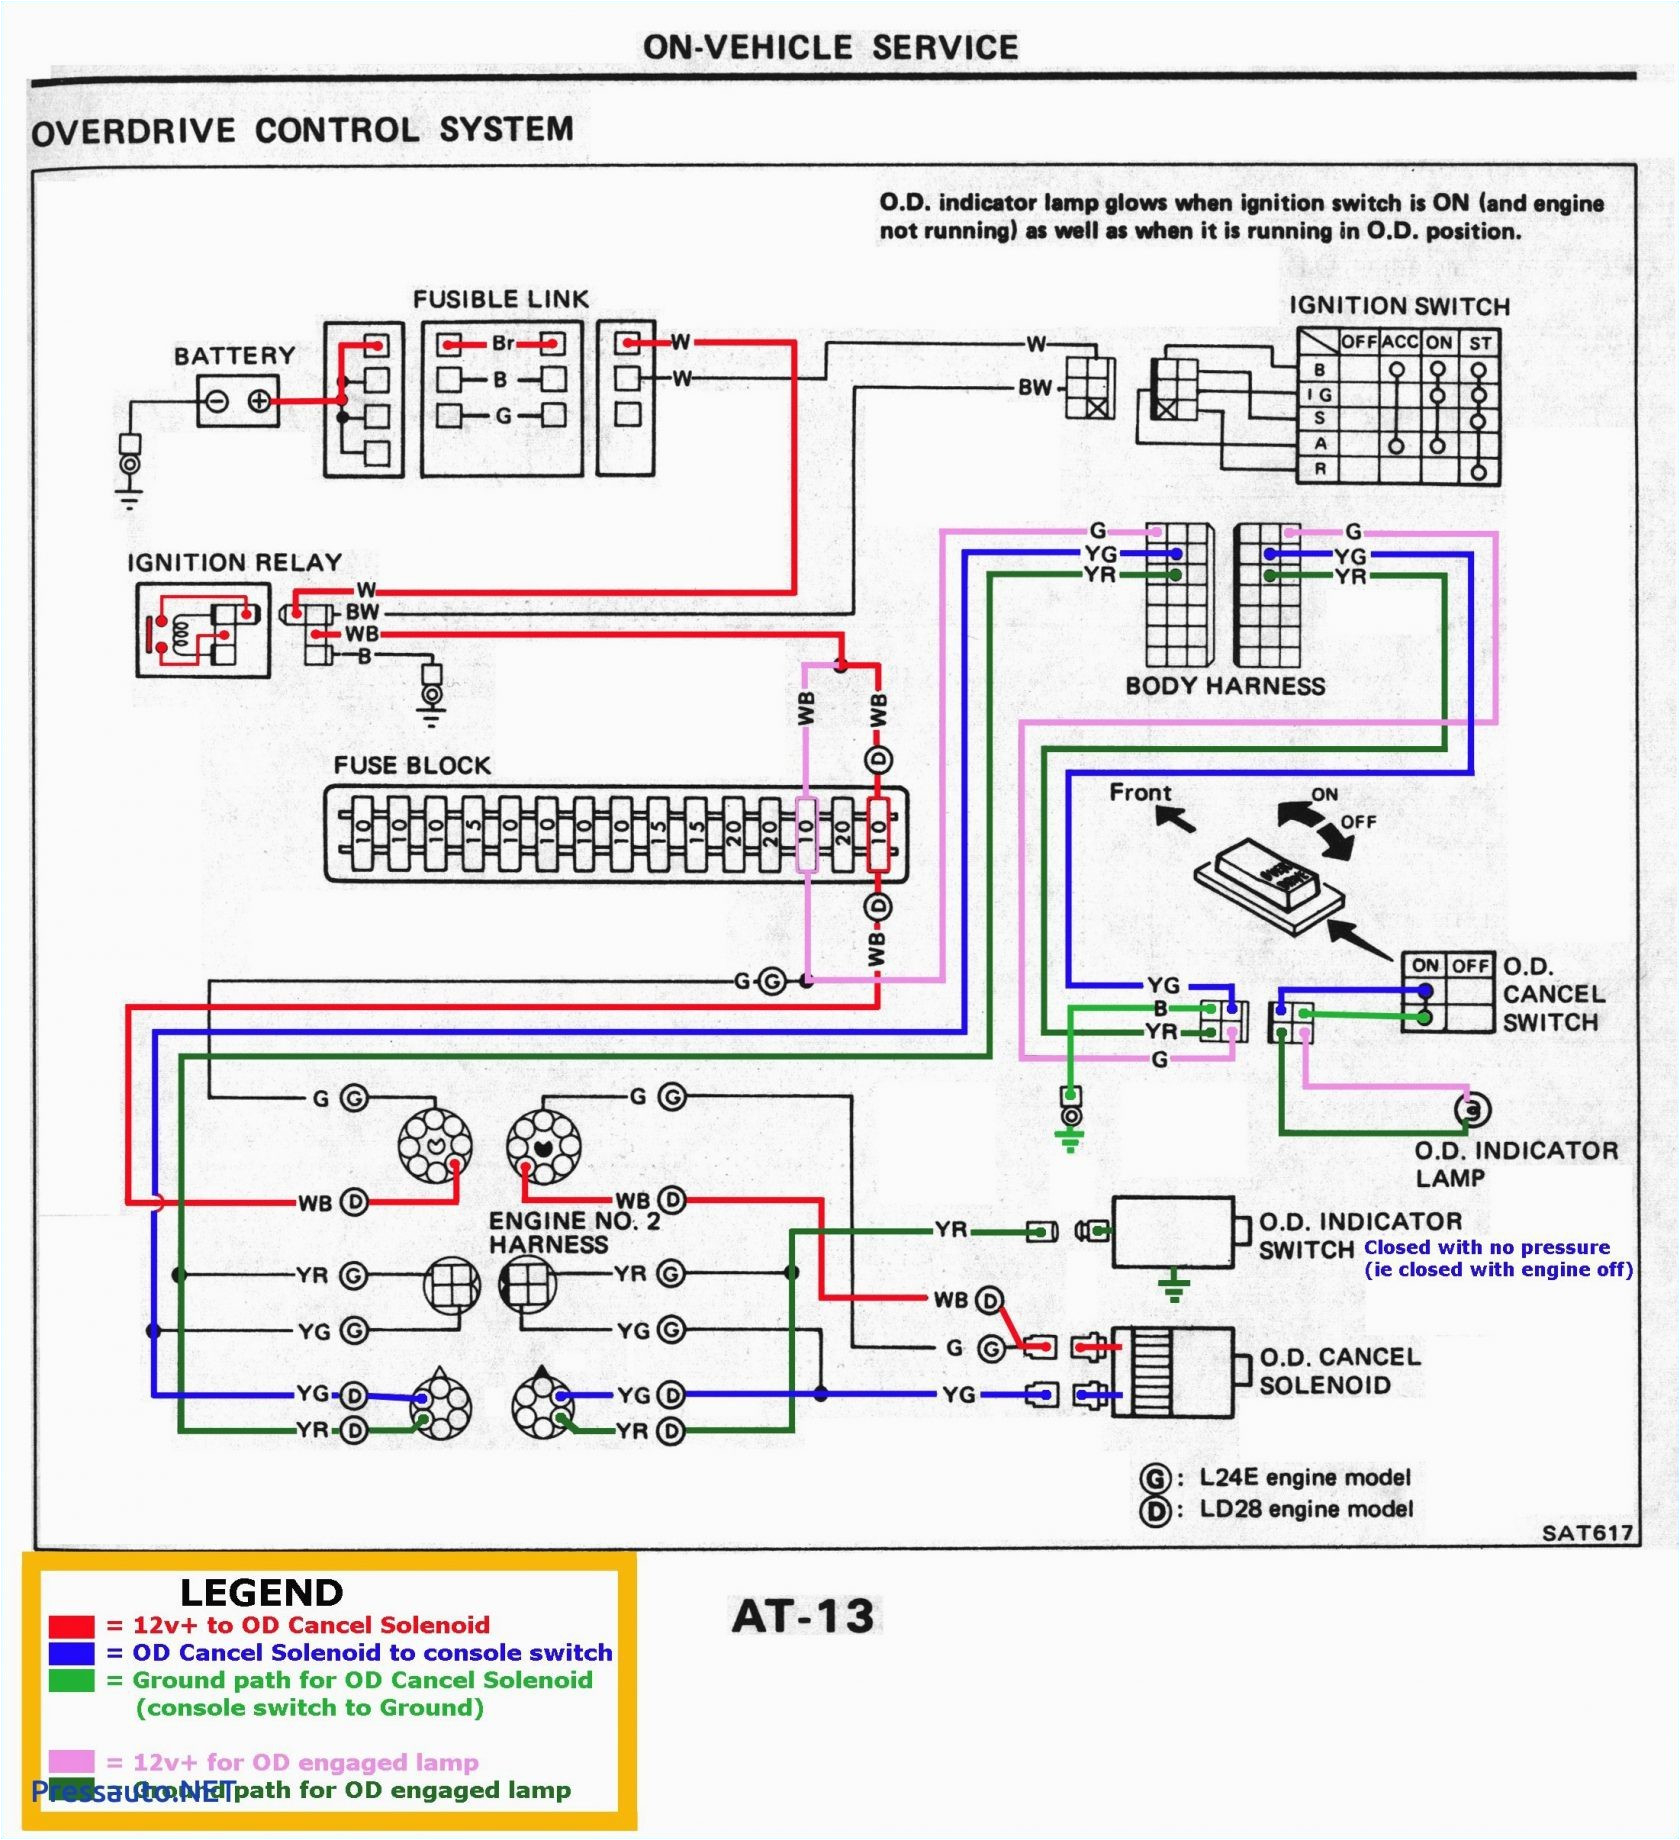 2002 chevy tahoe ac system diagram fuel pump relay location 2005 diagram besides chevy impala transmission solenoid likewise 2005 chevy